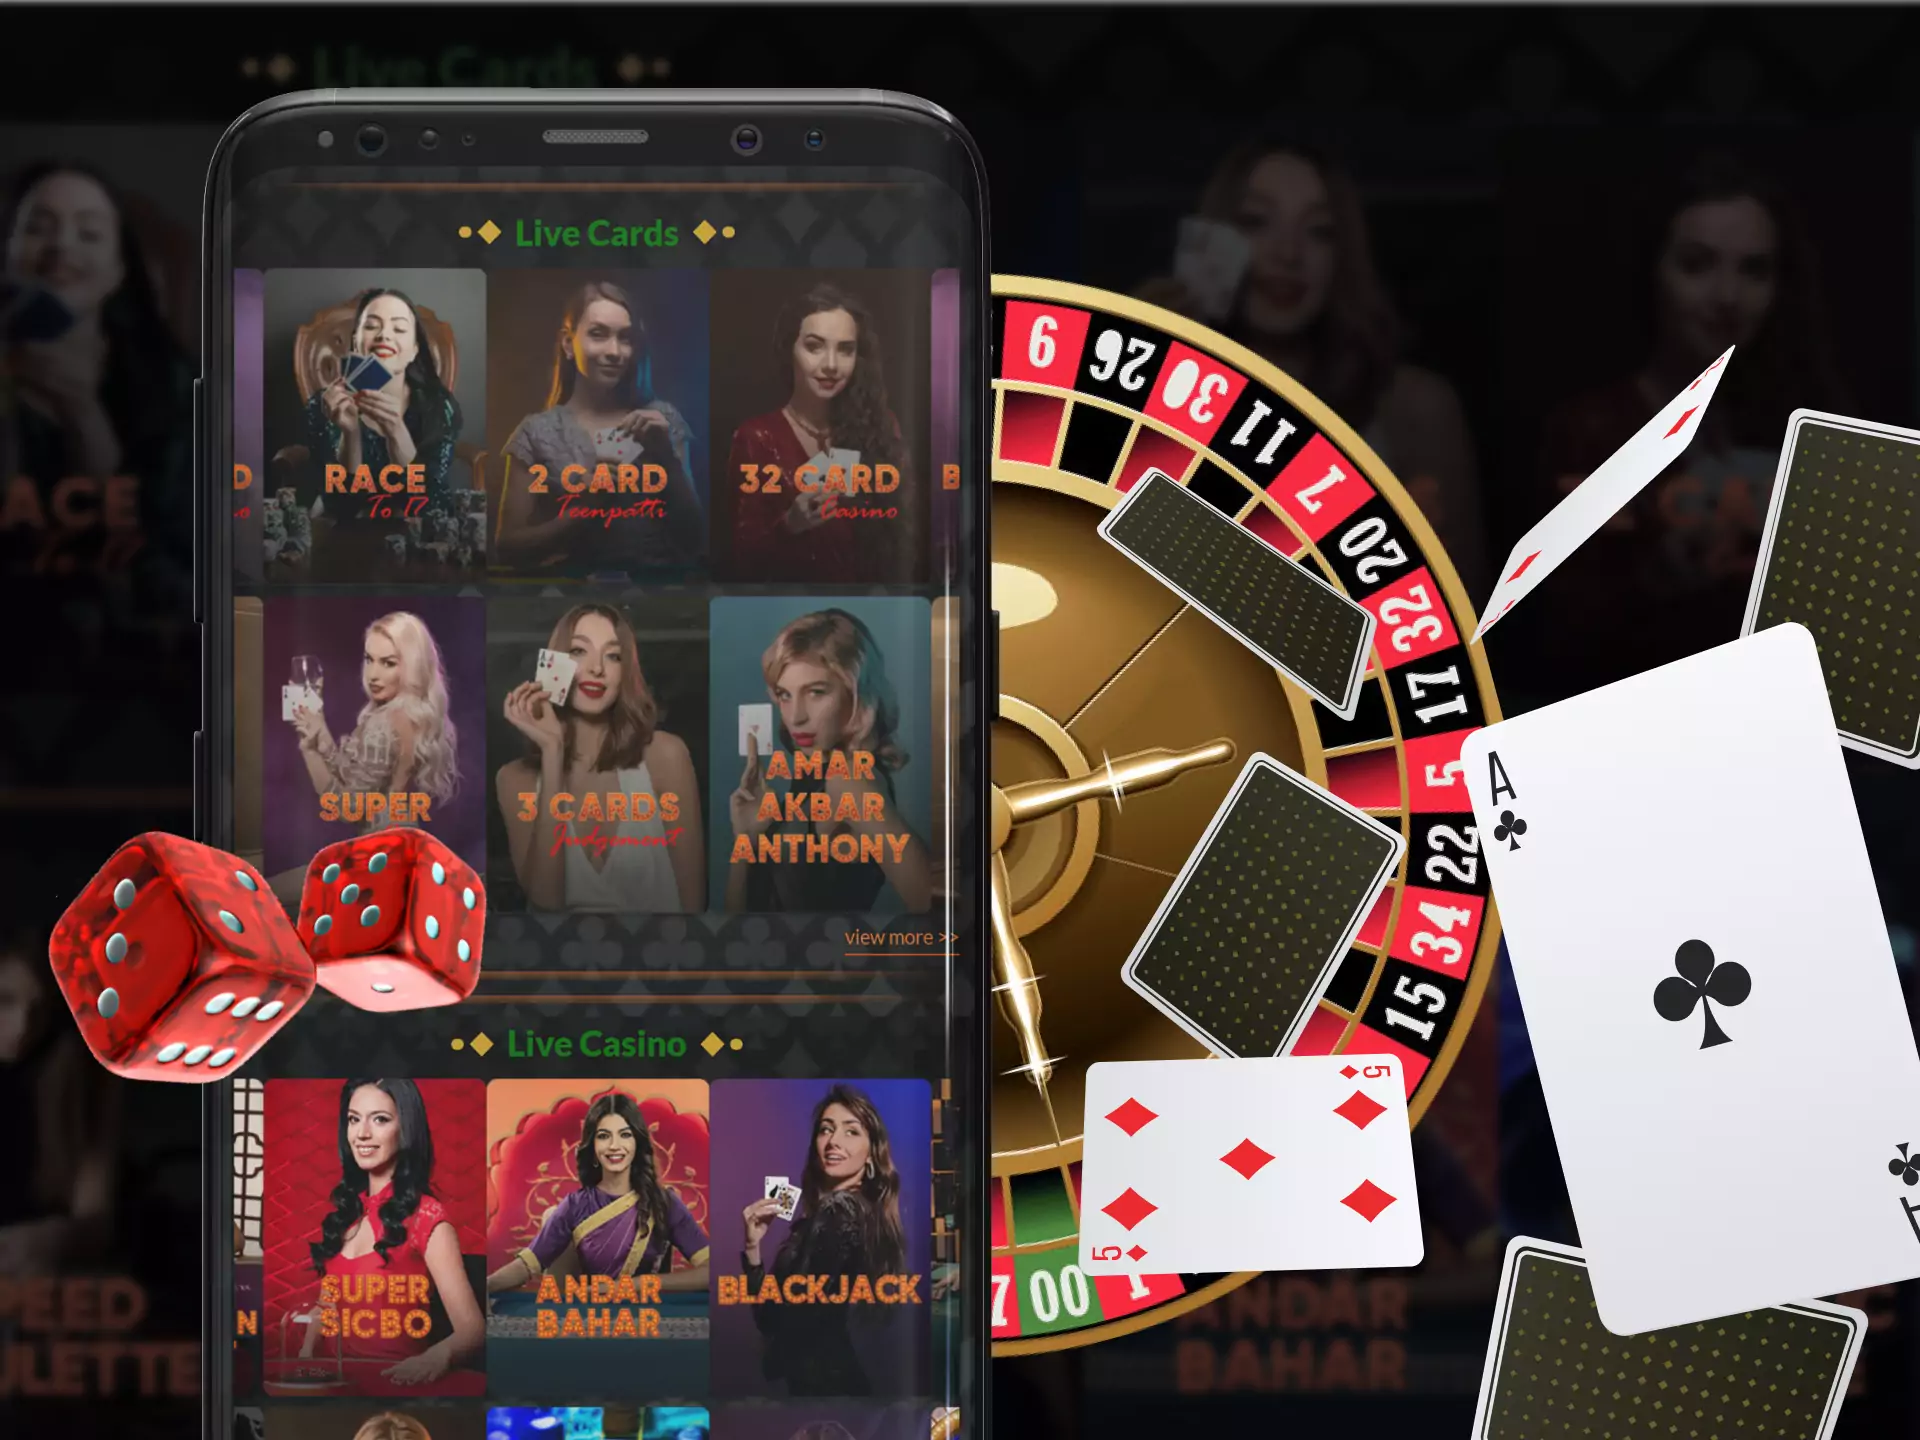 In the Fairplay app, go to the Сasino section and start playing your favorite games.